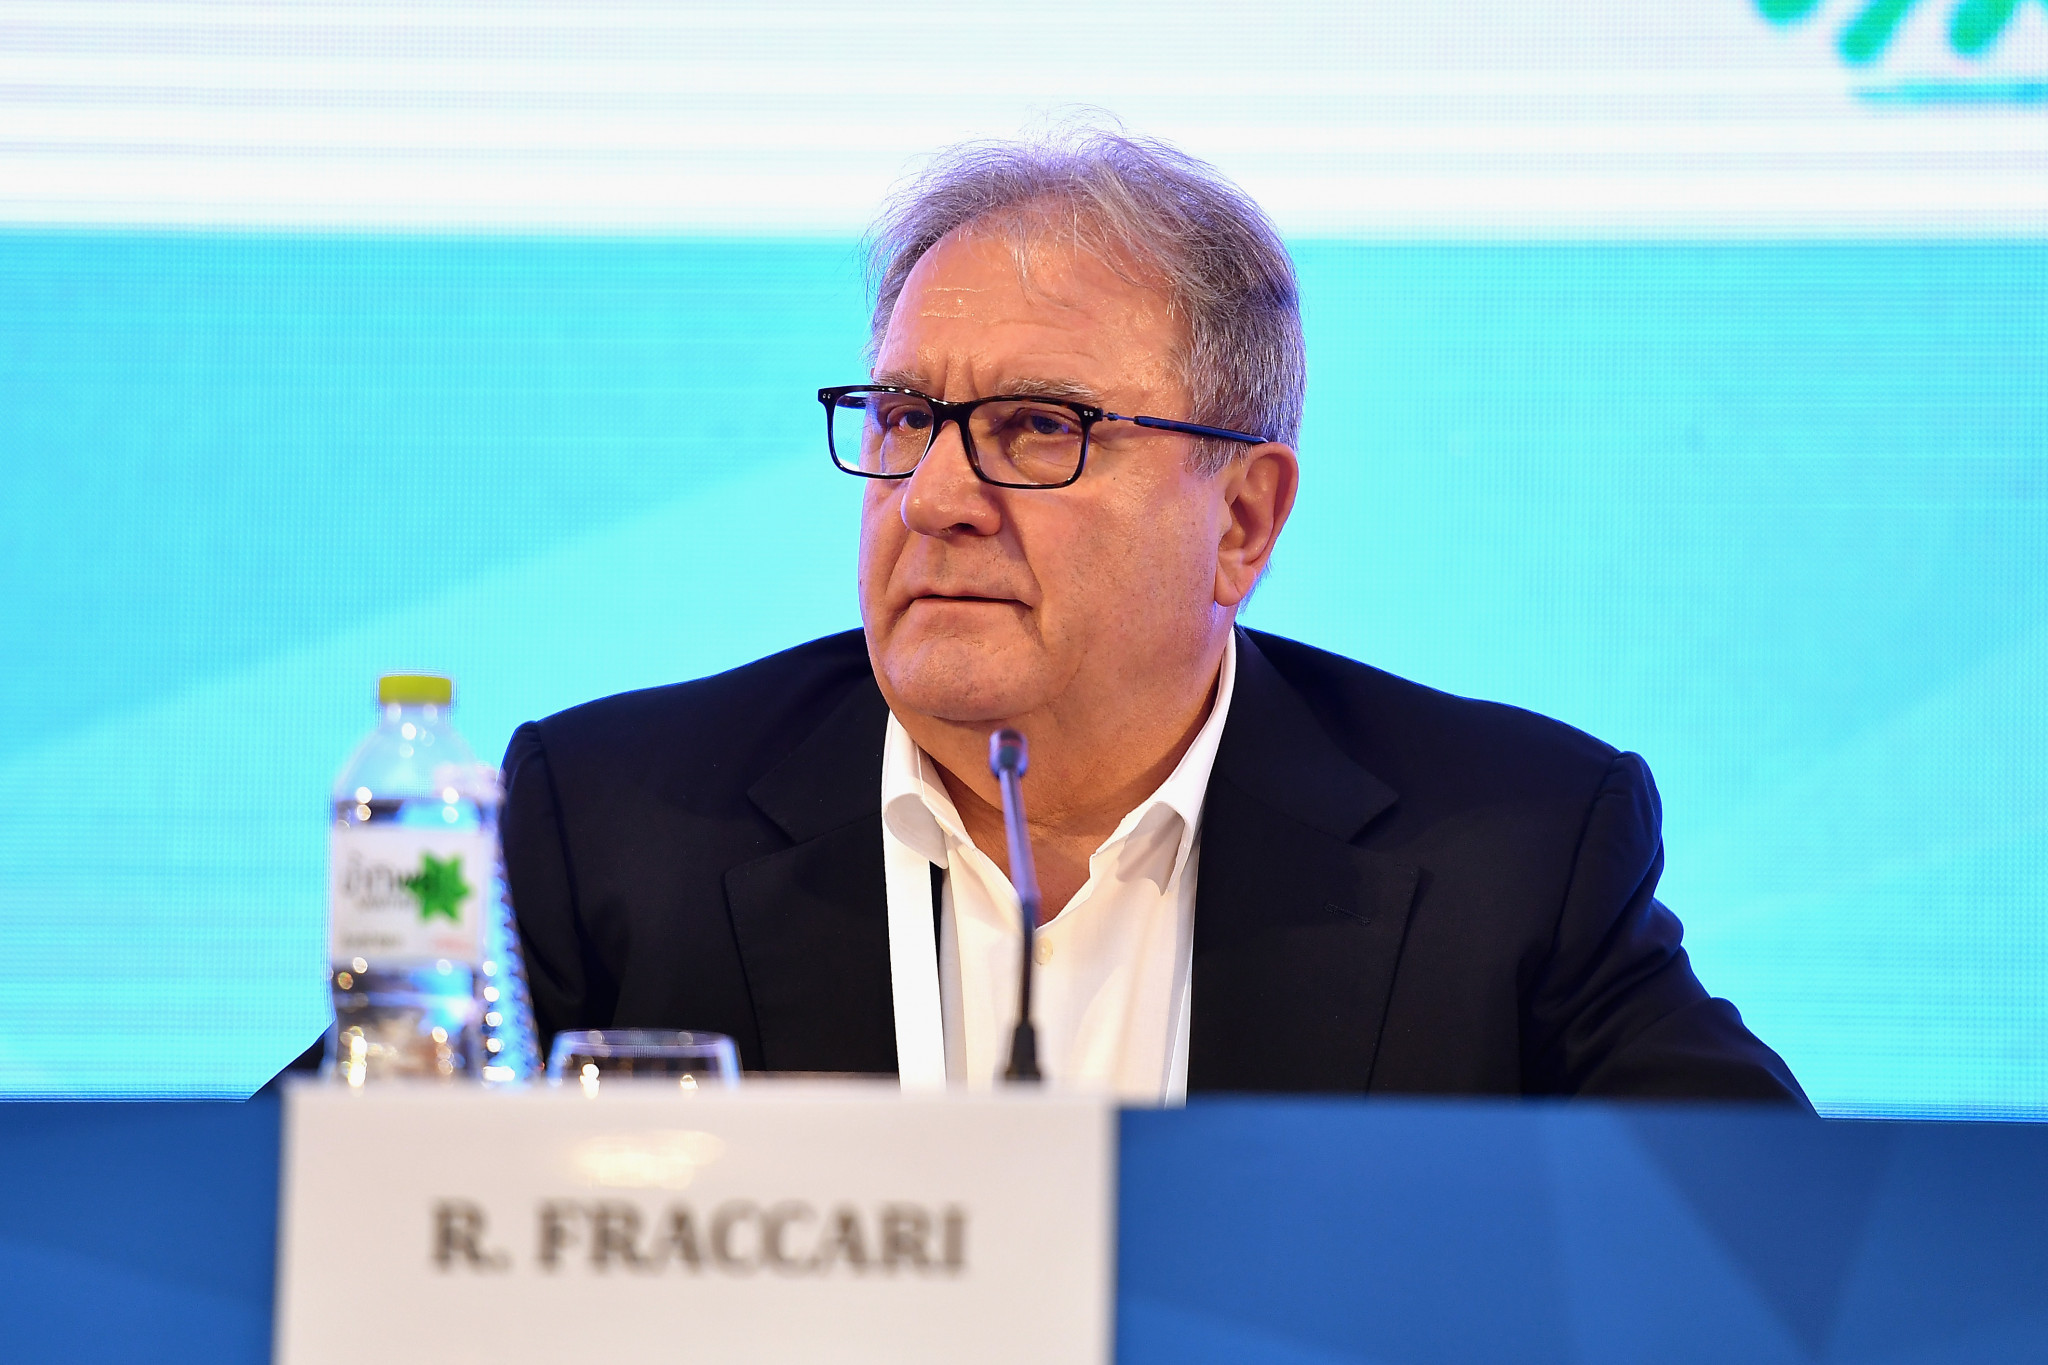 WBSC President Riccardo Fraccari has continually raised concerns on the sport's format at Tokyo 2020 ©Getty Images